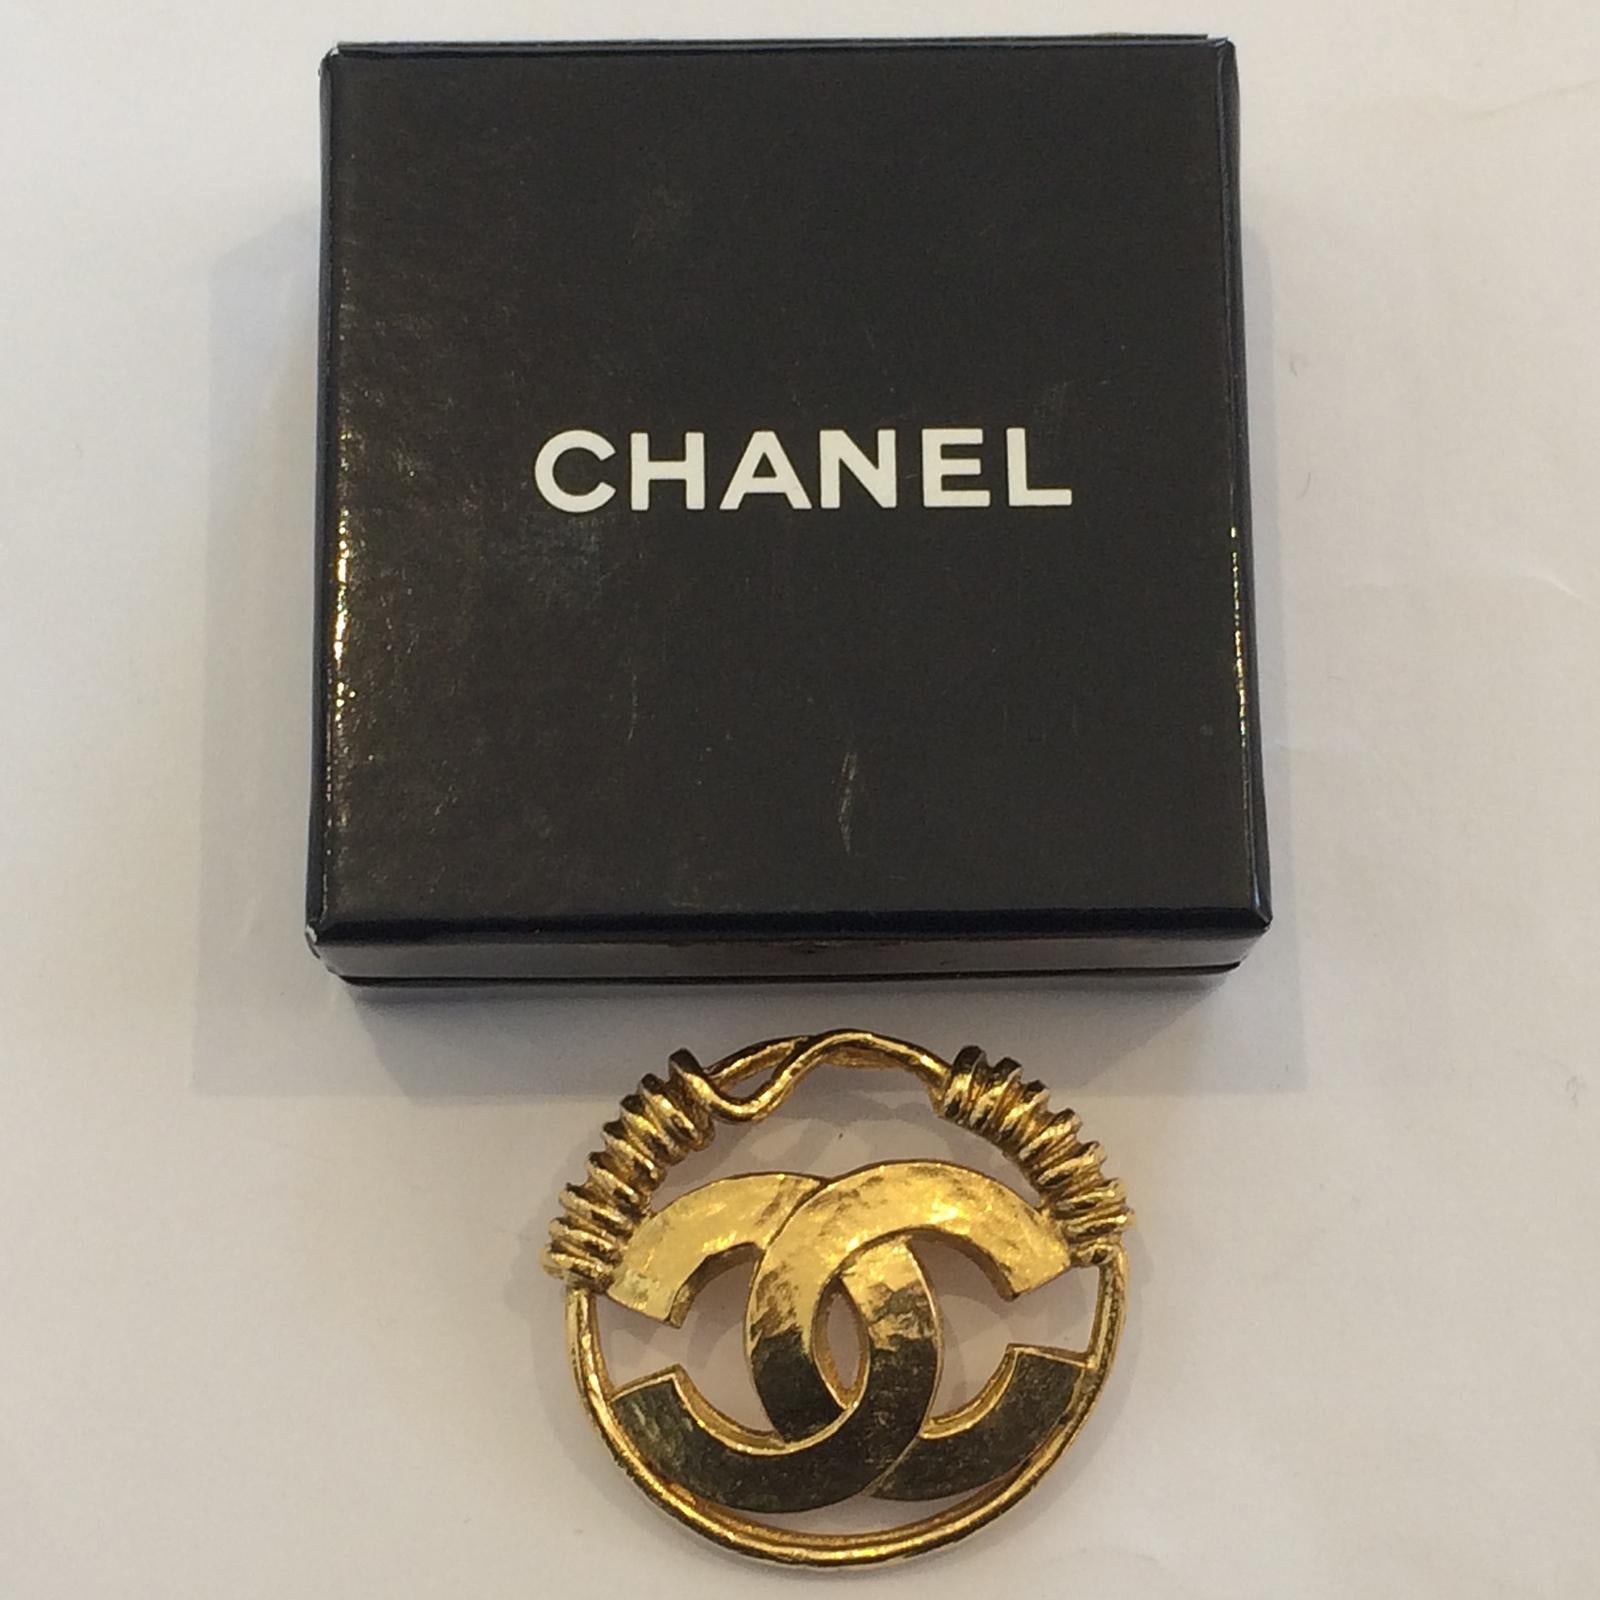 Authentic Chanel Brooch in 24ct Gold Plate with original Box. Amazing Craftsmanship, using the Internationally recognised Logo of “CC” with Coiled Rodd creating the closure of pin on both sides. Original “roll-over” safety clasp at rear pin in